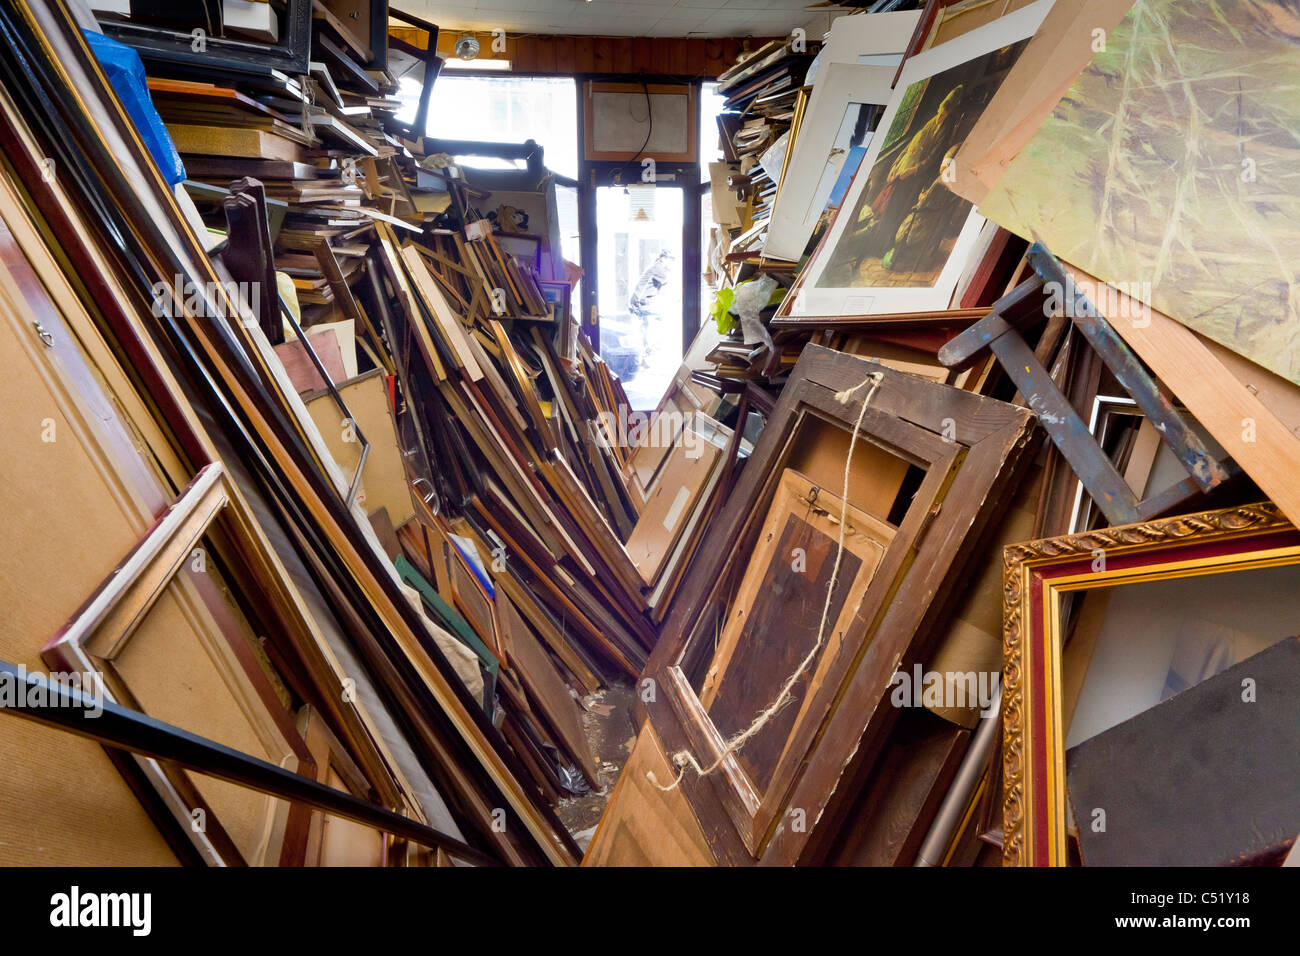 The over-stocked Ryde Framing picture framing shop in Ryde Isle of Wight. JMH5149 Stock Photo